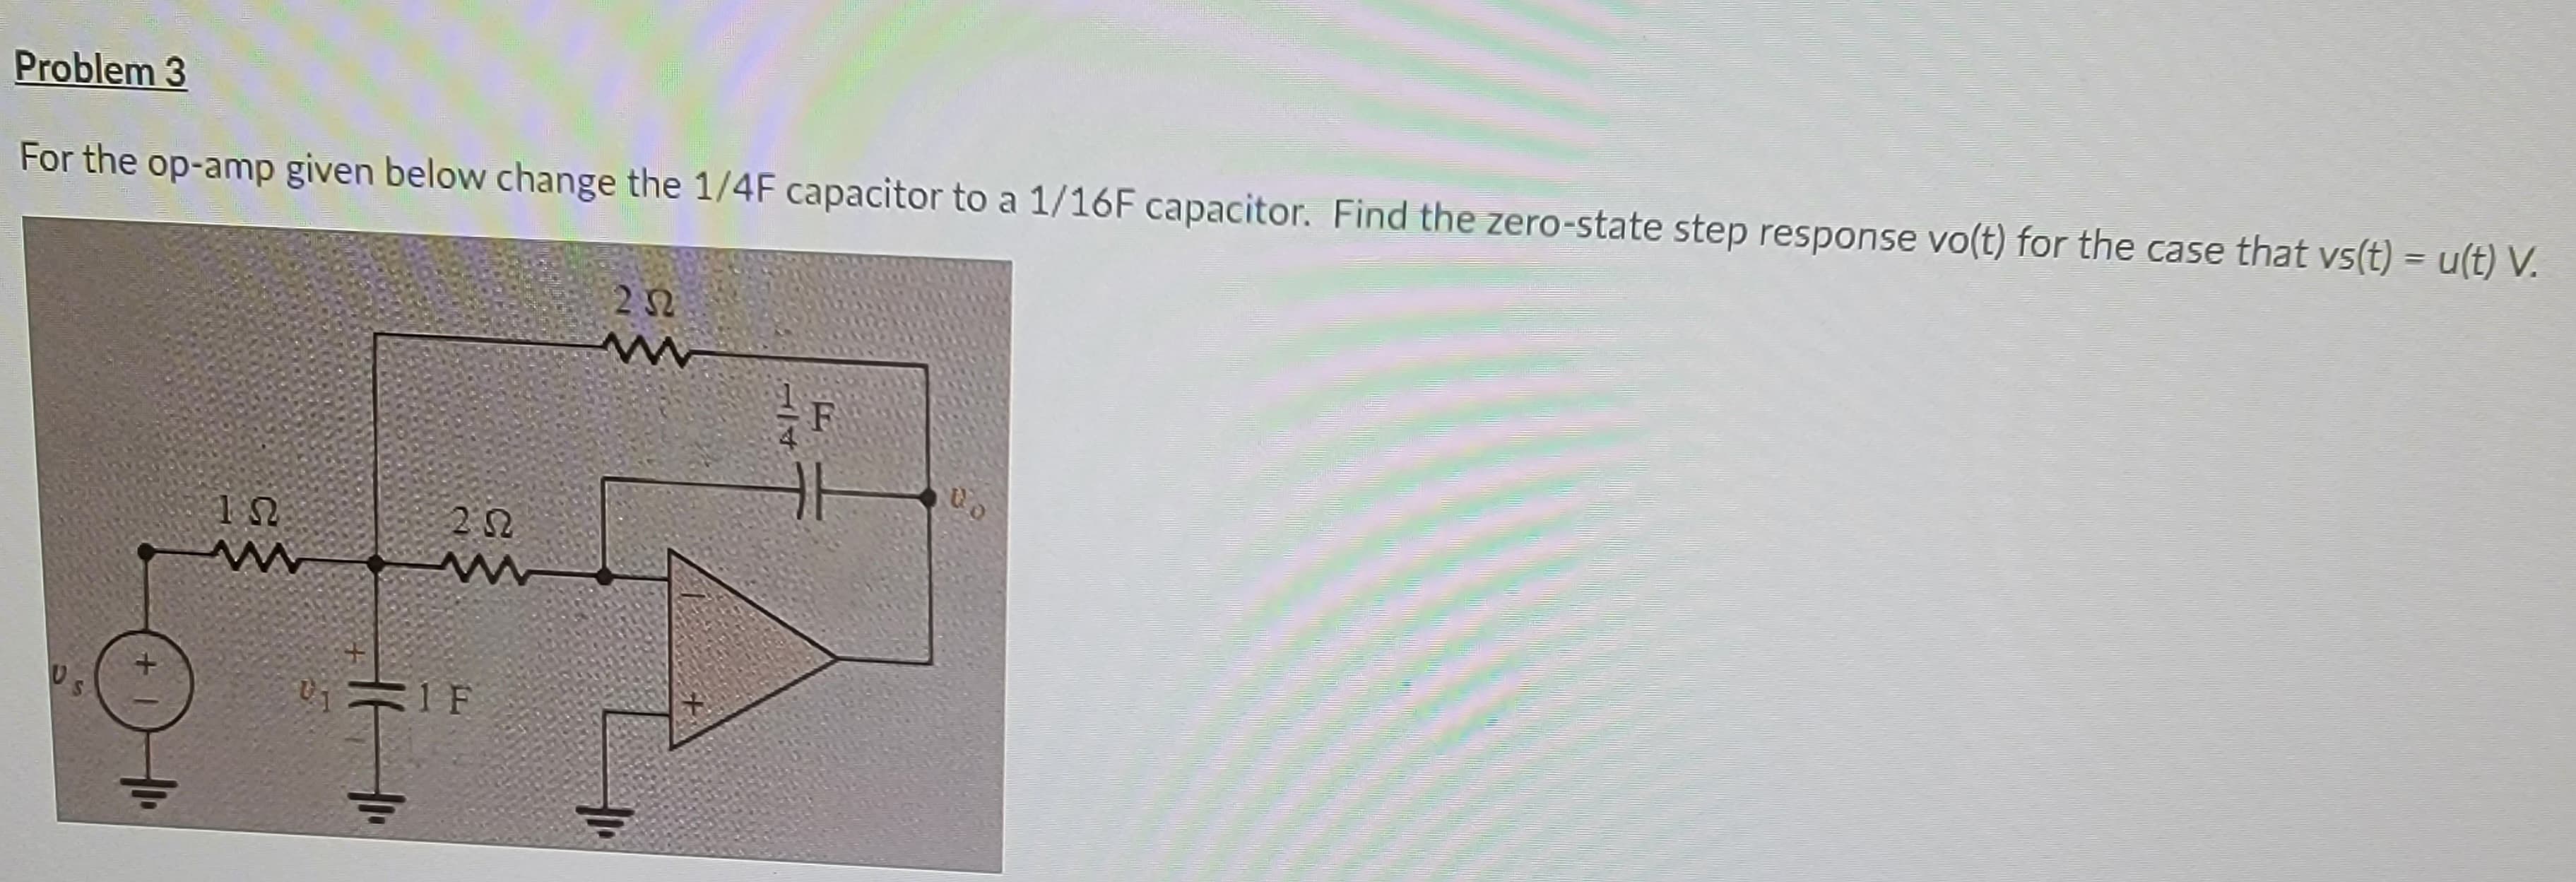 Problem 3
For the op-amp given below change the 1/4F capacitor to a 1/16F capacitor. Find the zero-state step response vo(t) for the case that vs(t) = u(t) V.
US
ΤΩ
01
16 11
2022
www
1 F
232
HD₂
114
카